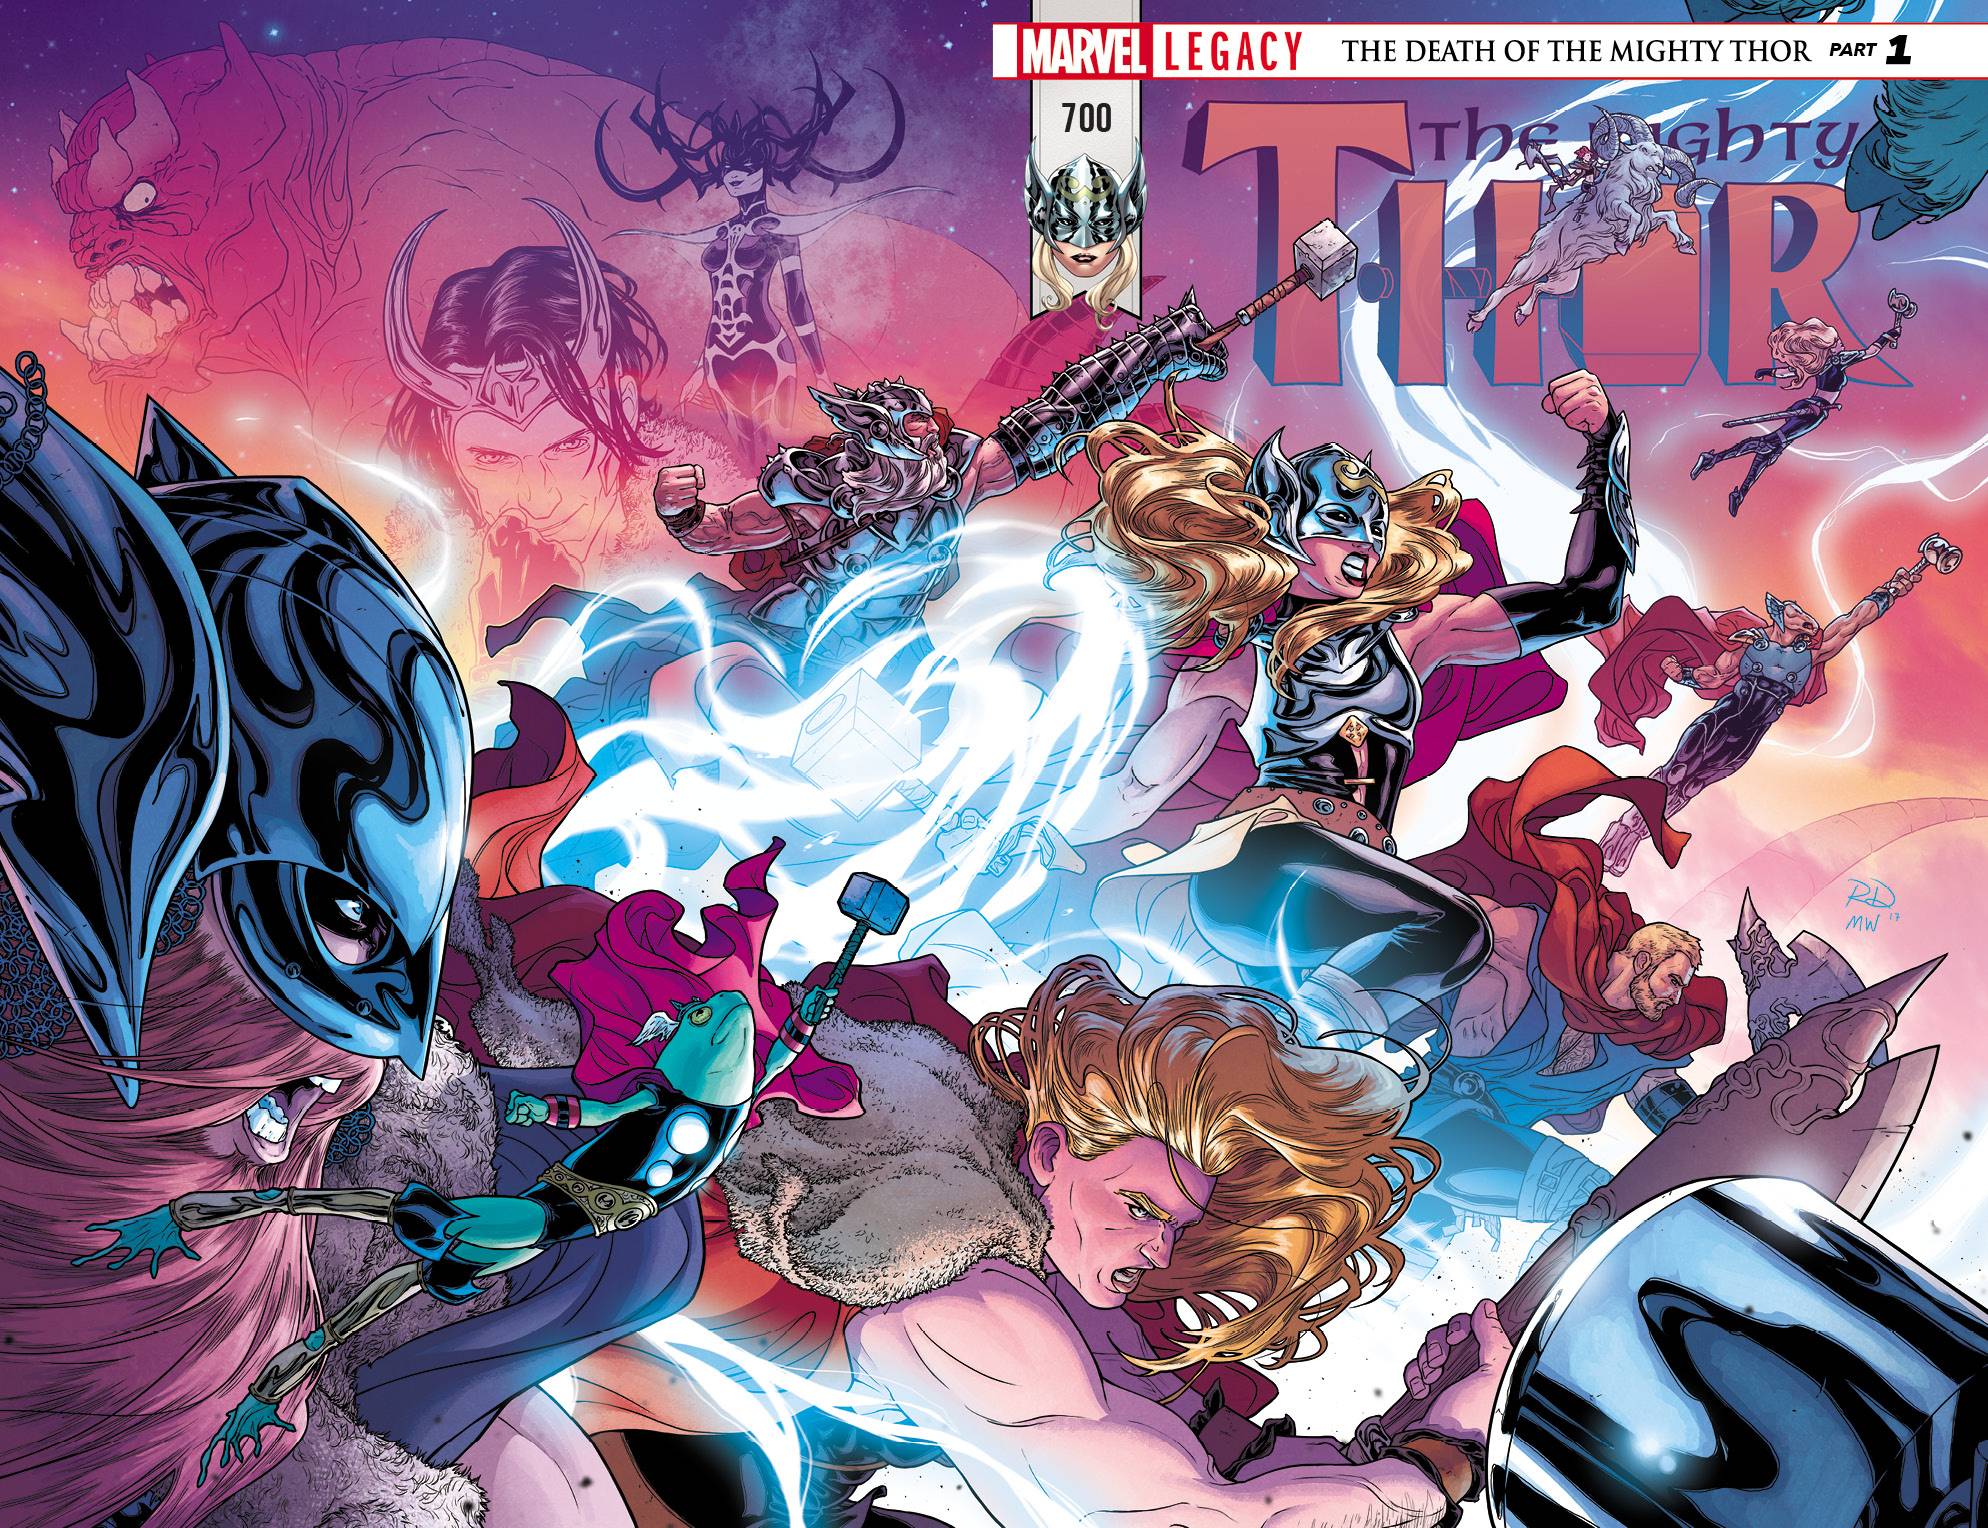 Mighty Thor #700 Leg - State of Comics